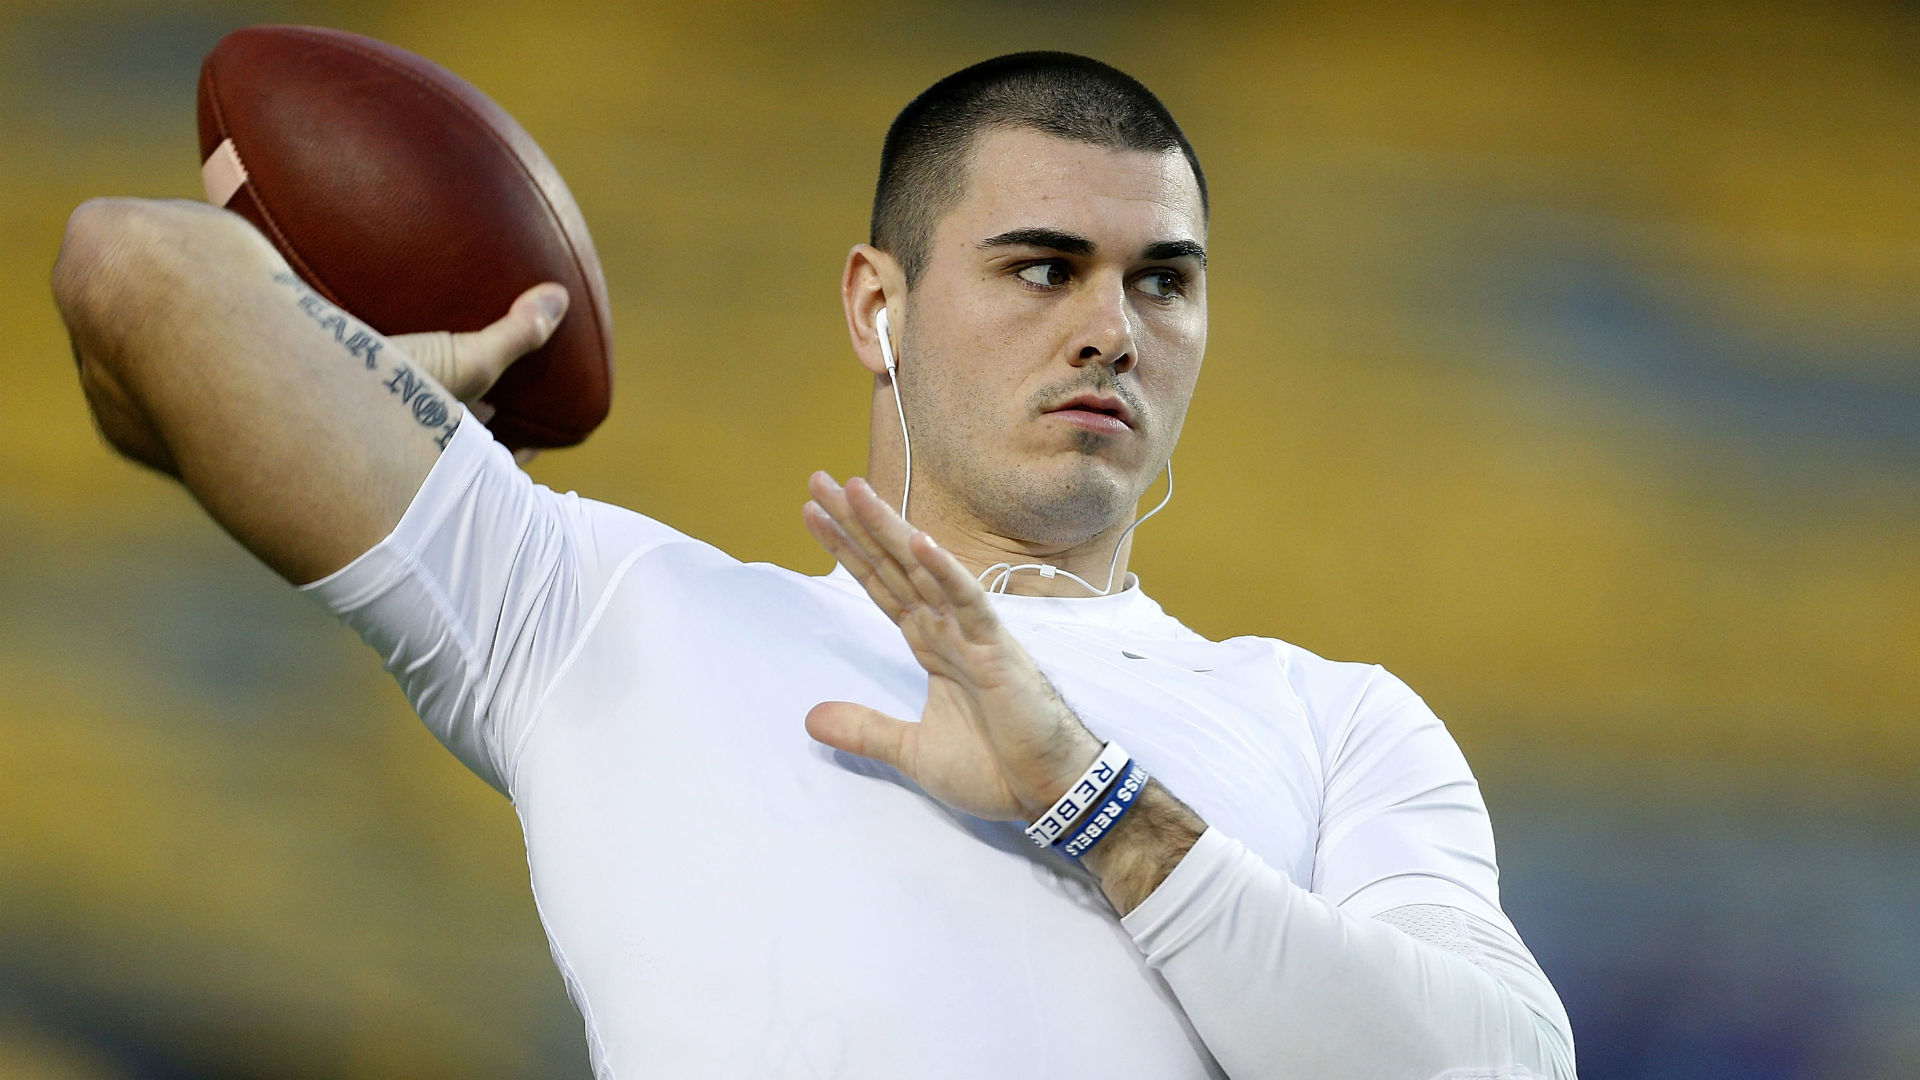 Colts waive Chad Kelly following 2-game suspension